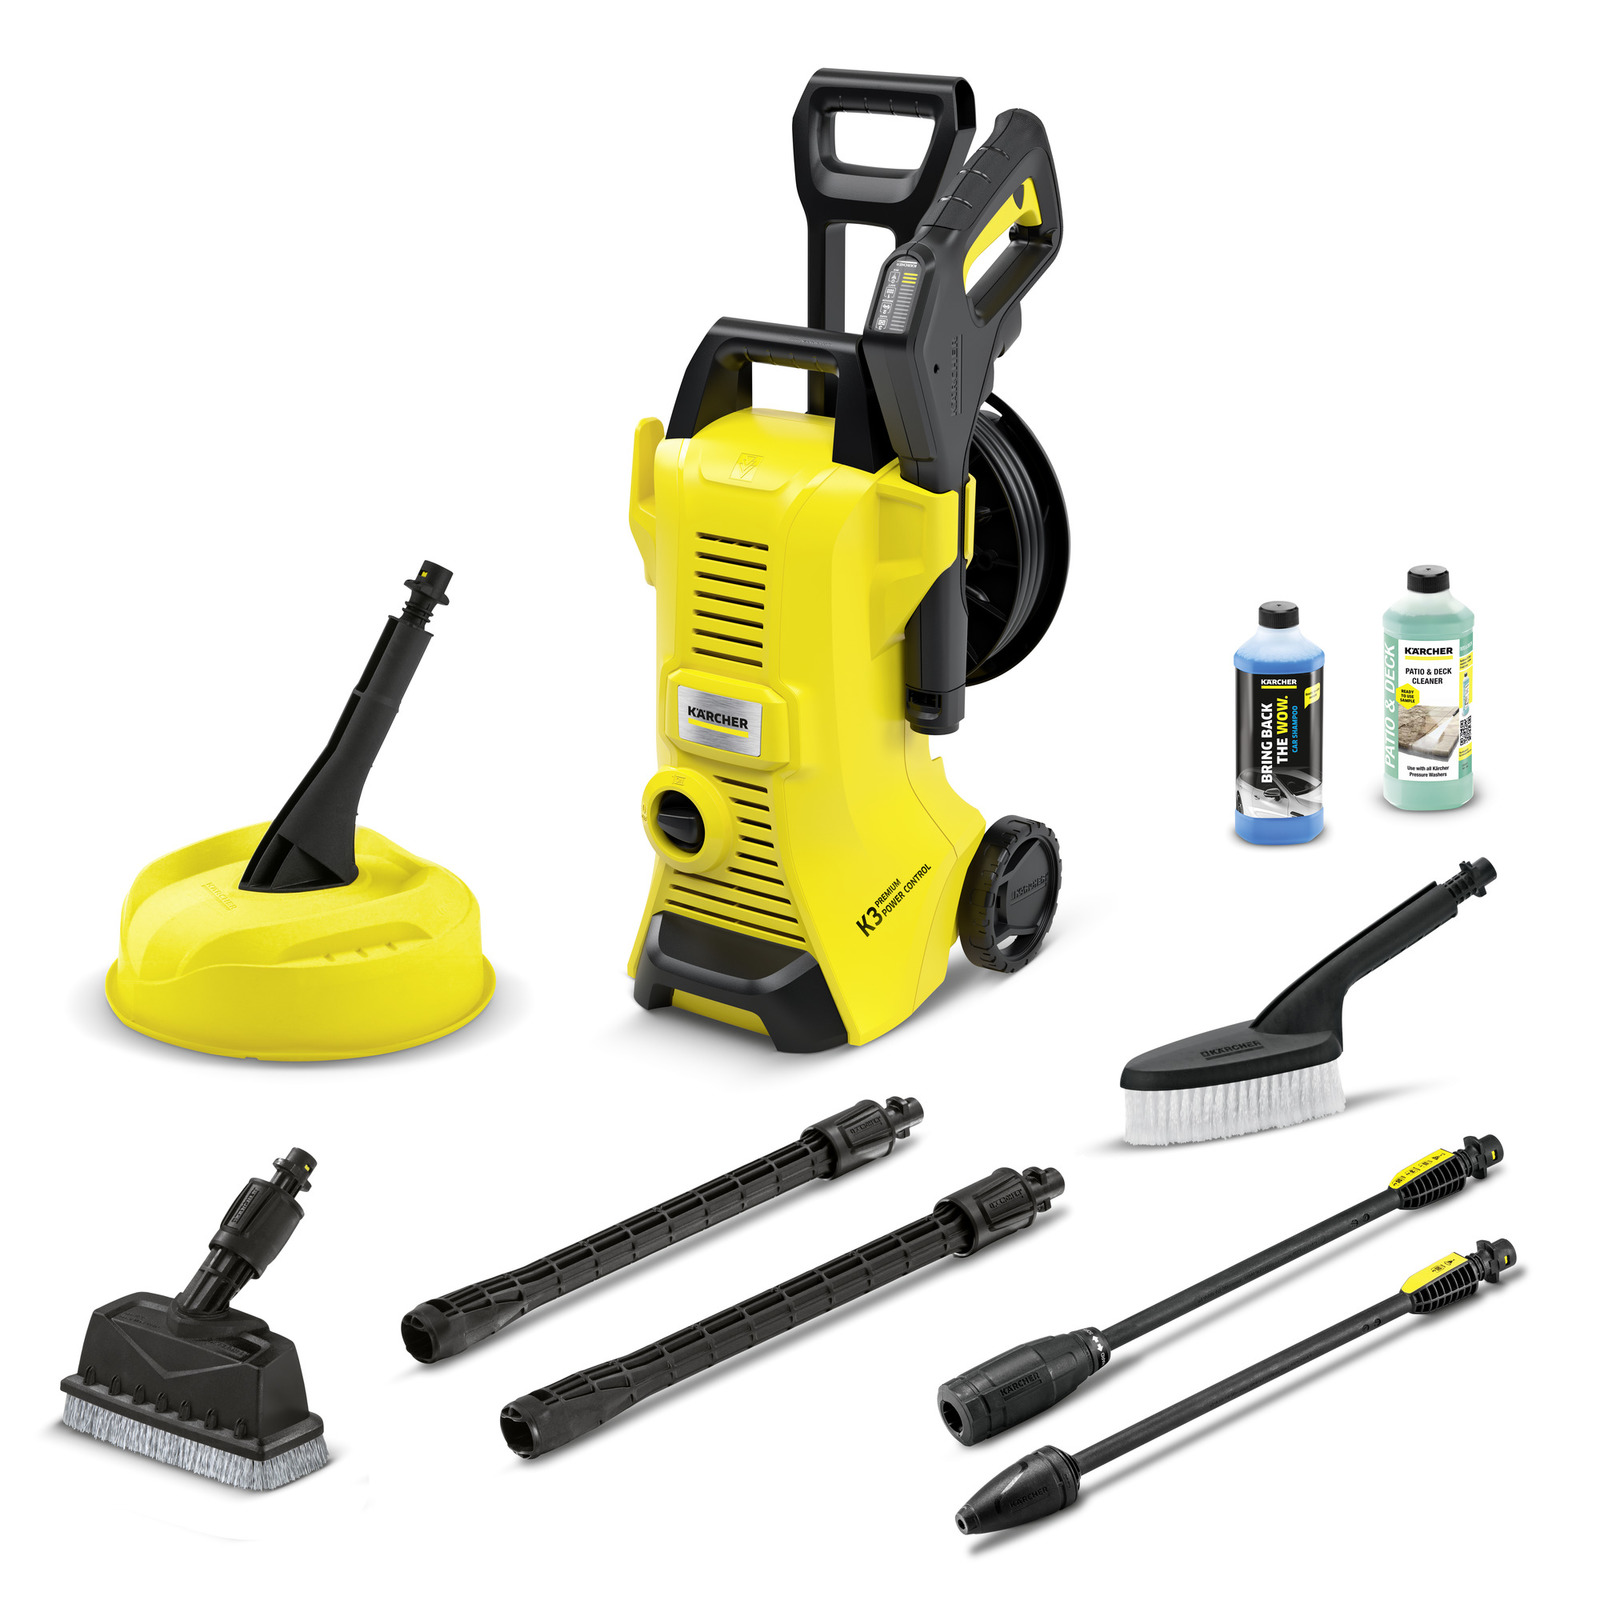 Karcher K3 Pressure Washer with Power Control and Car Kit - 1.602-735.0 -  Karcher